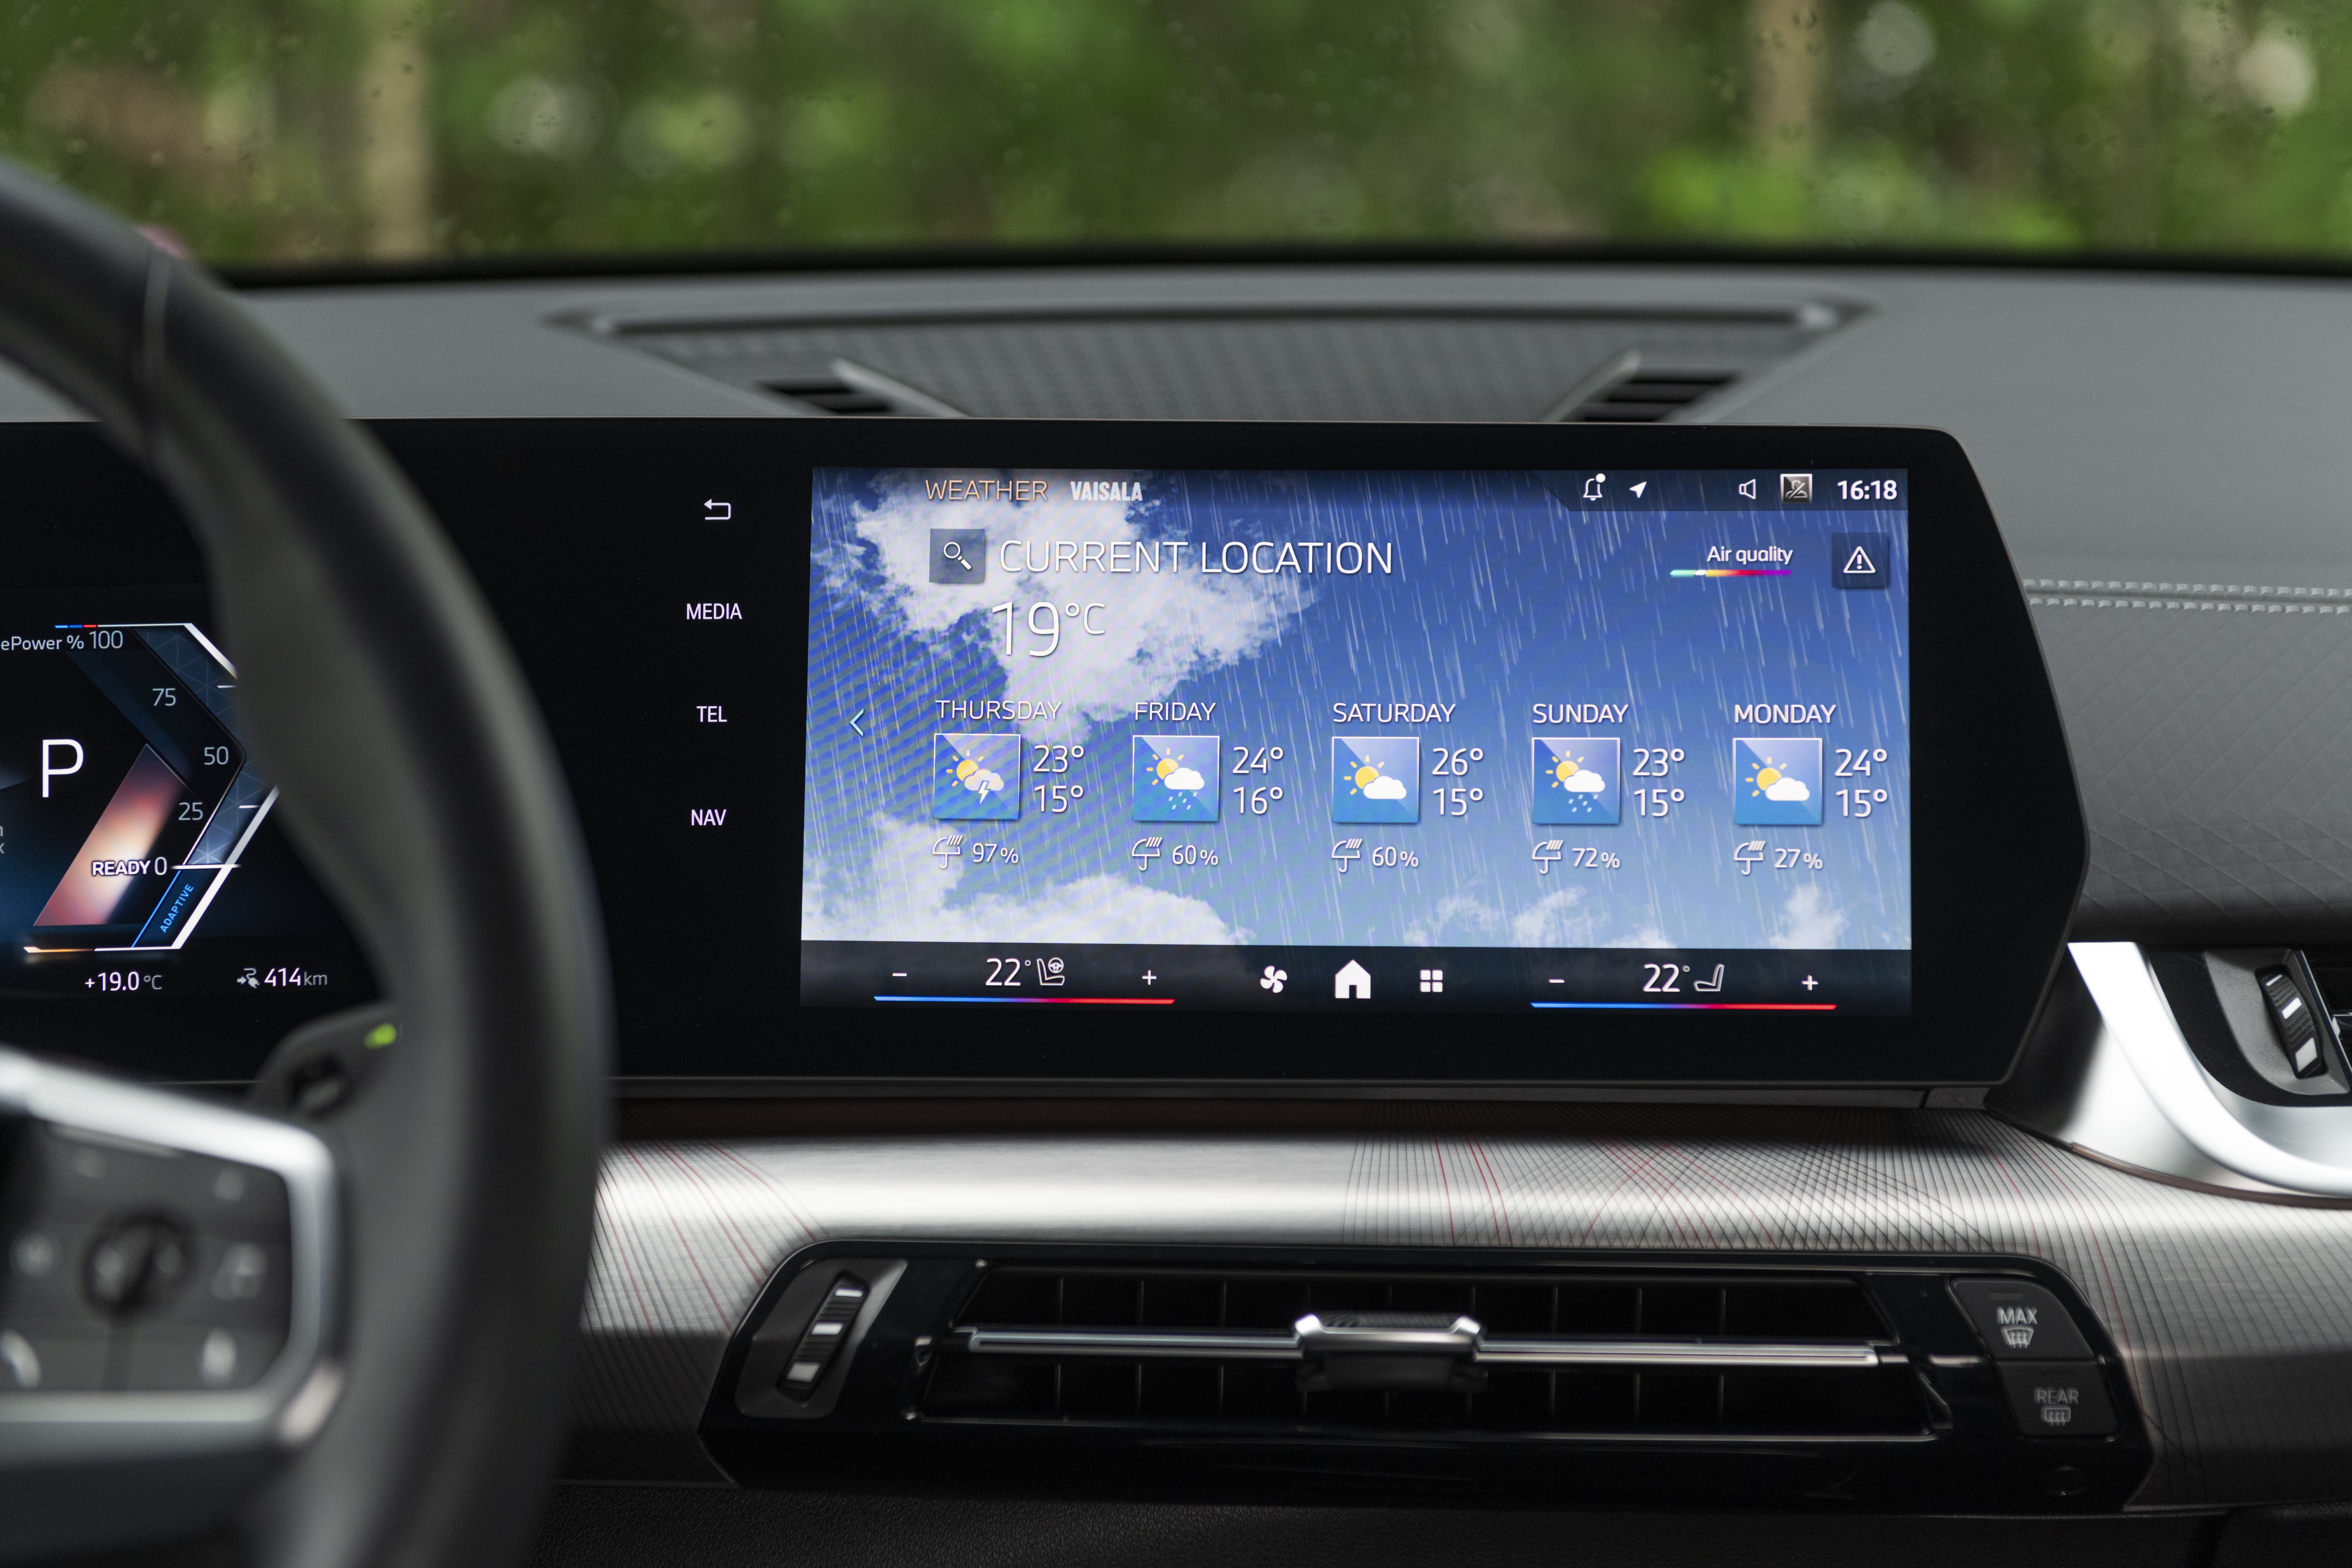 Vaisala Xweather weather and air quality data on BMW car infotainment system